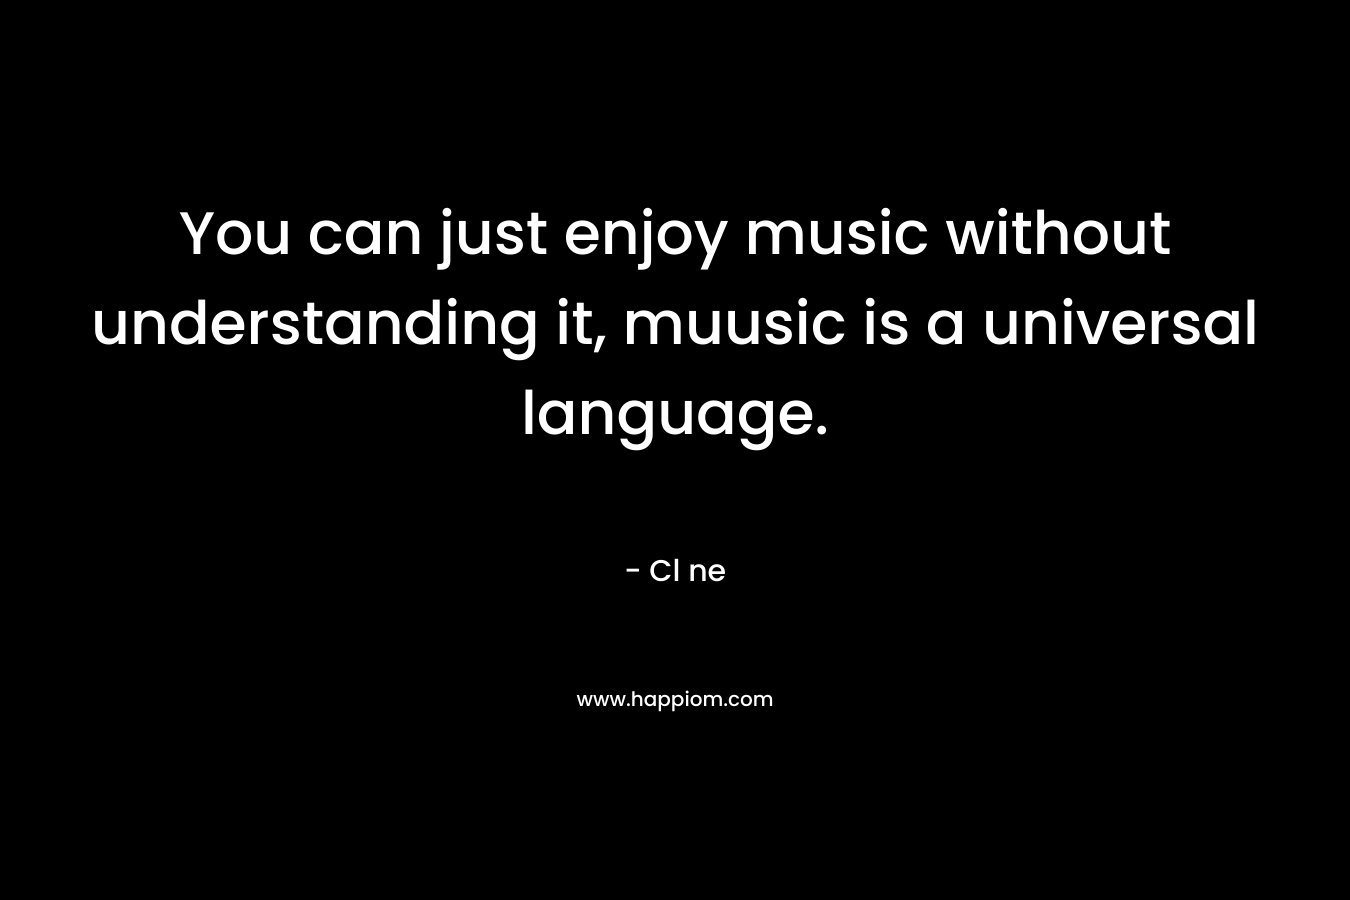 You can just enjoy music without understanding it, muusic is a universal language.